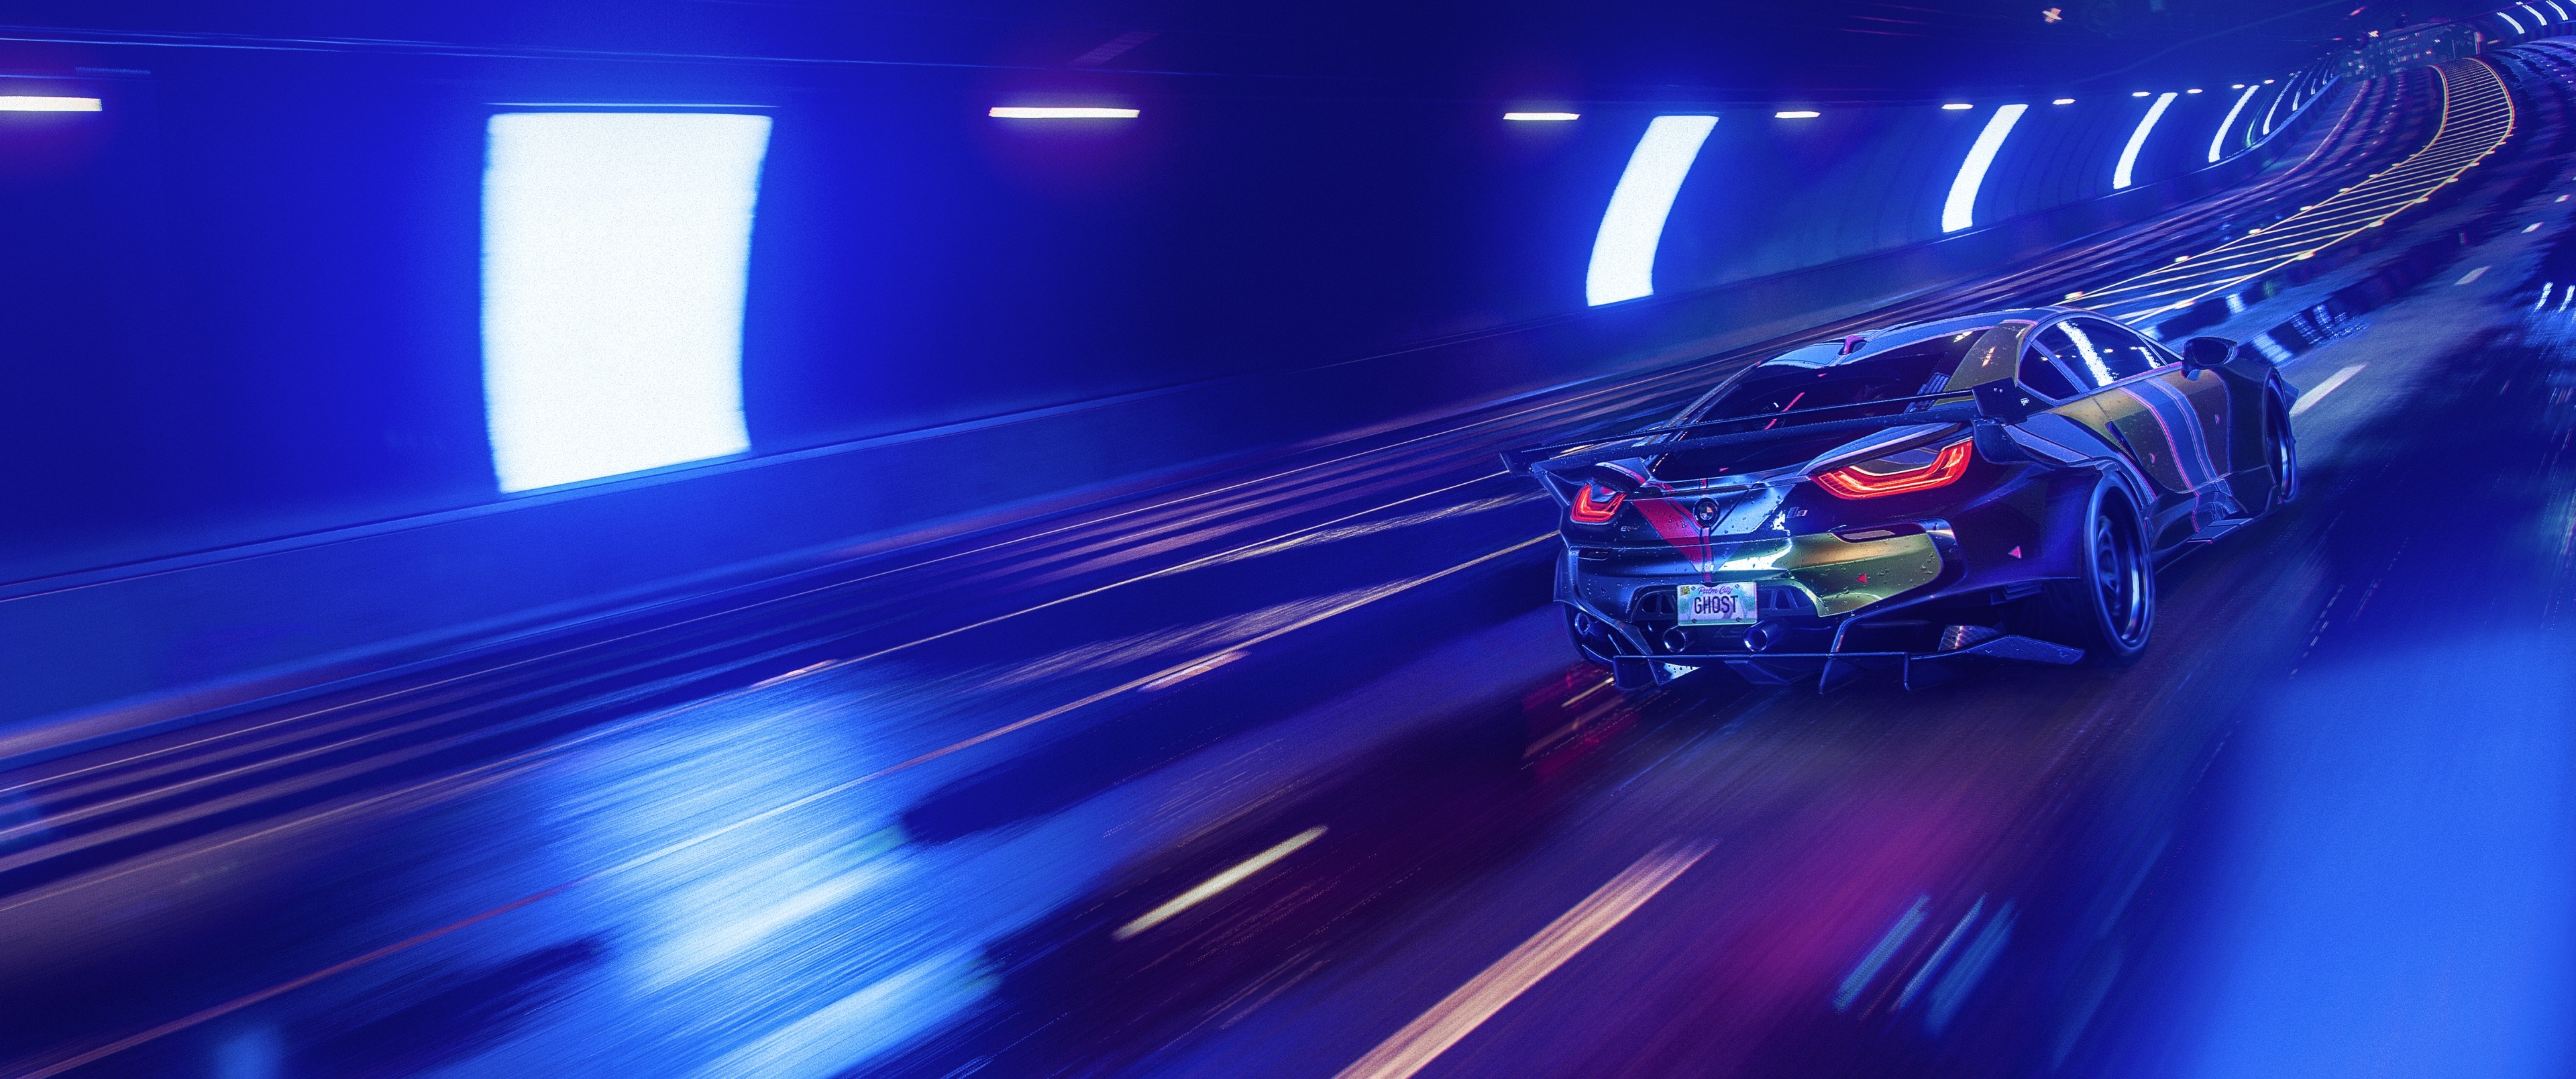 Need For Speed Race Car 3840x1608